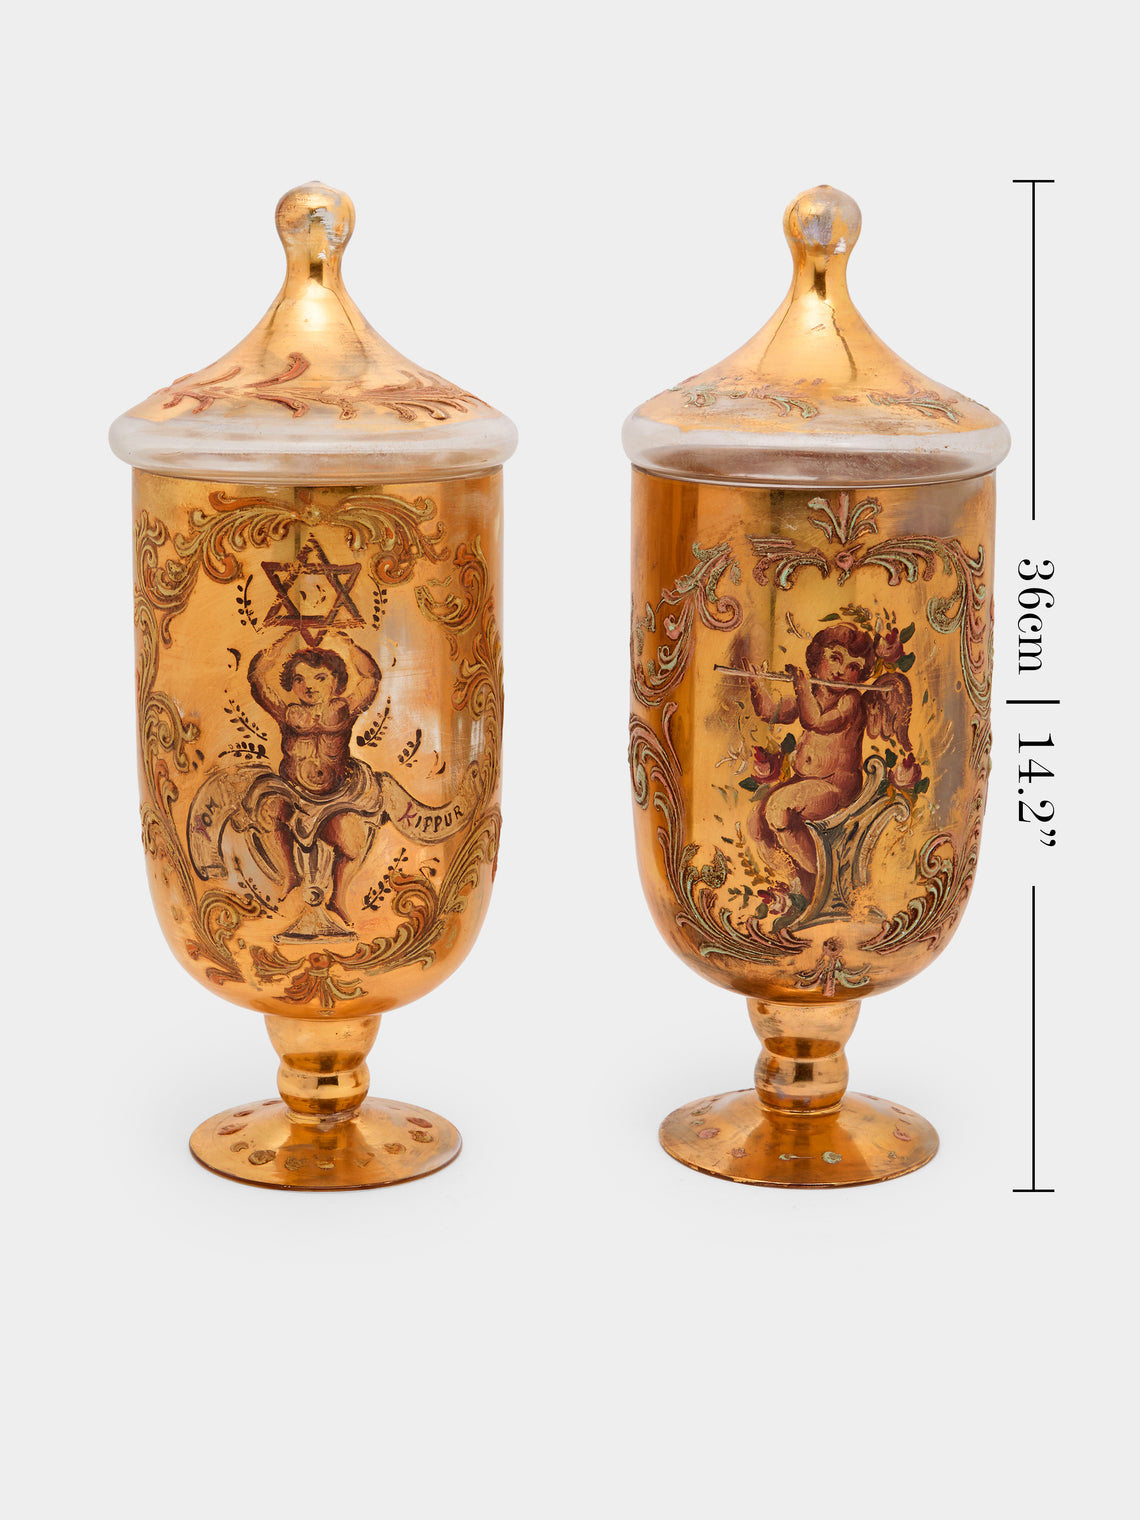 Antique and Vintage - 18th-Century Italian Glass Apothecary Jars (Set of 2) -  - ABASK